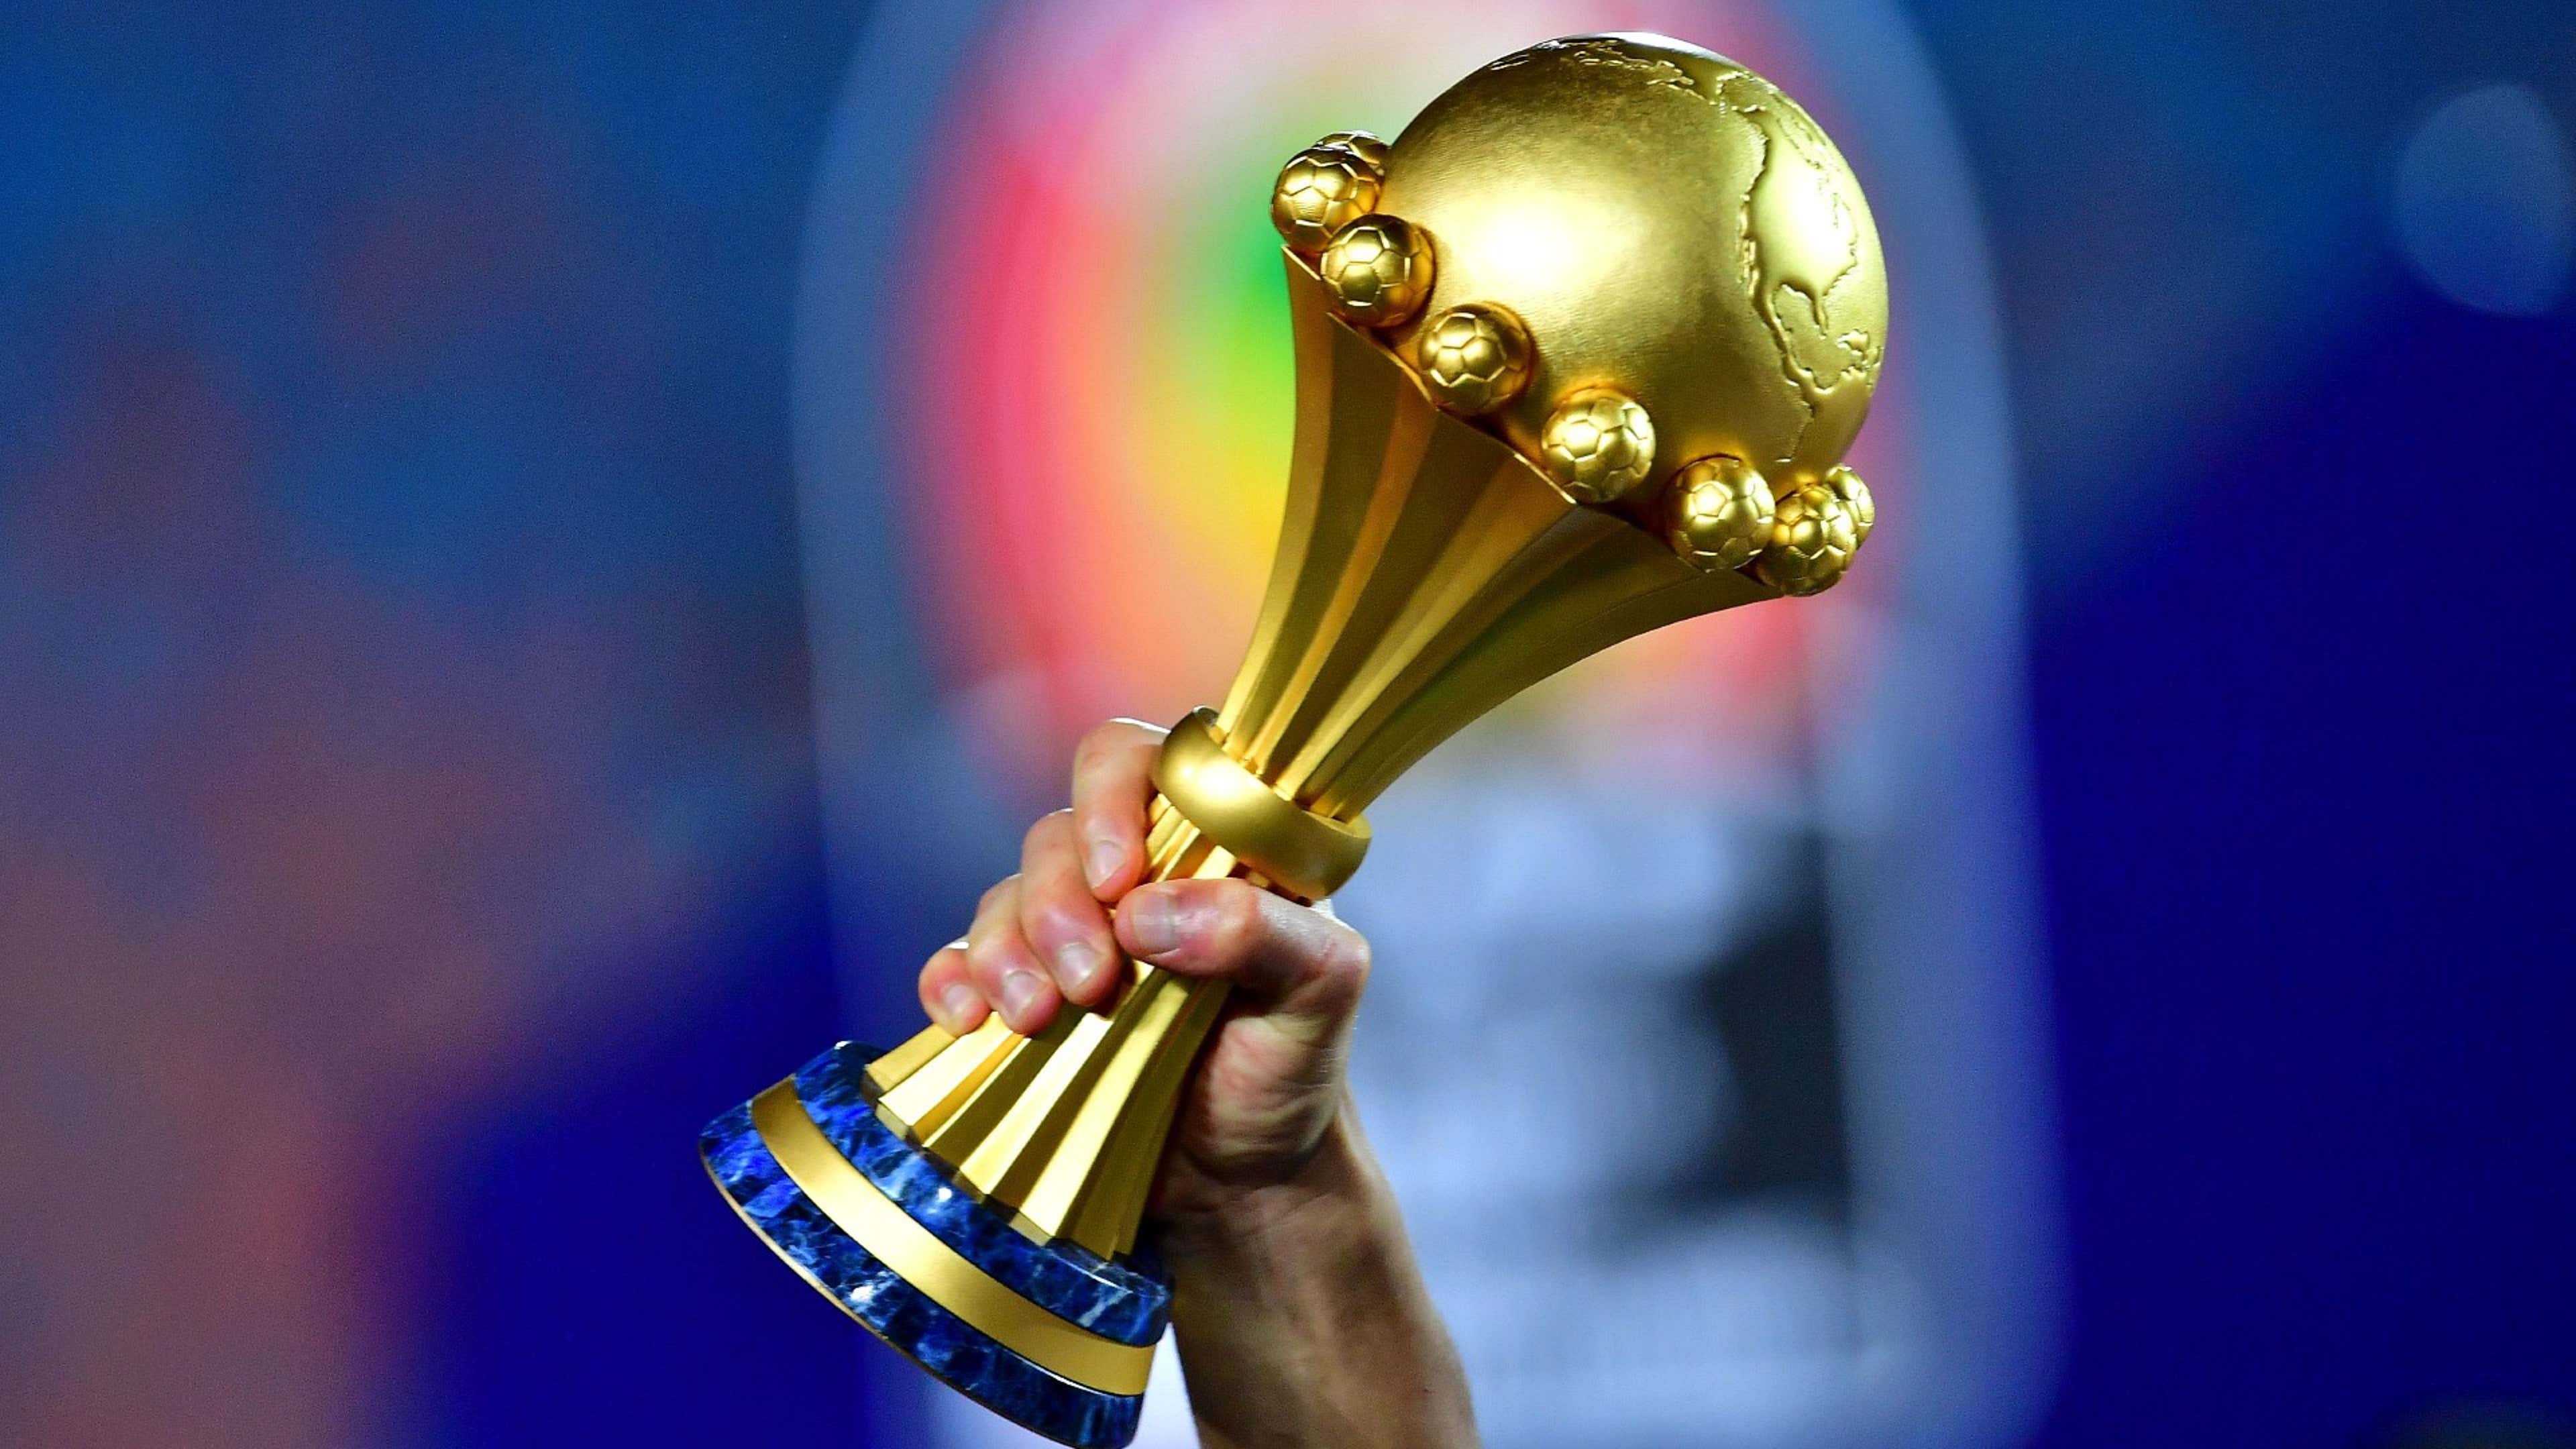 Afcon 2023 Qualification Draw: Nigeria face Guinea Bissau, Cameroon tackle  Kenya, South Africa play Morocco | Goal.com